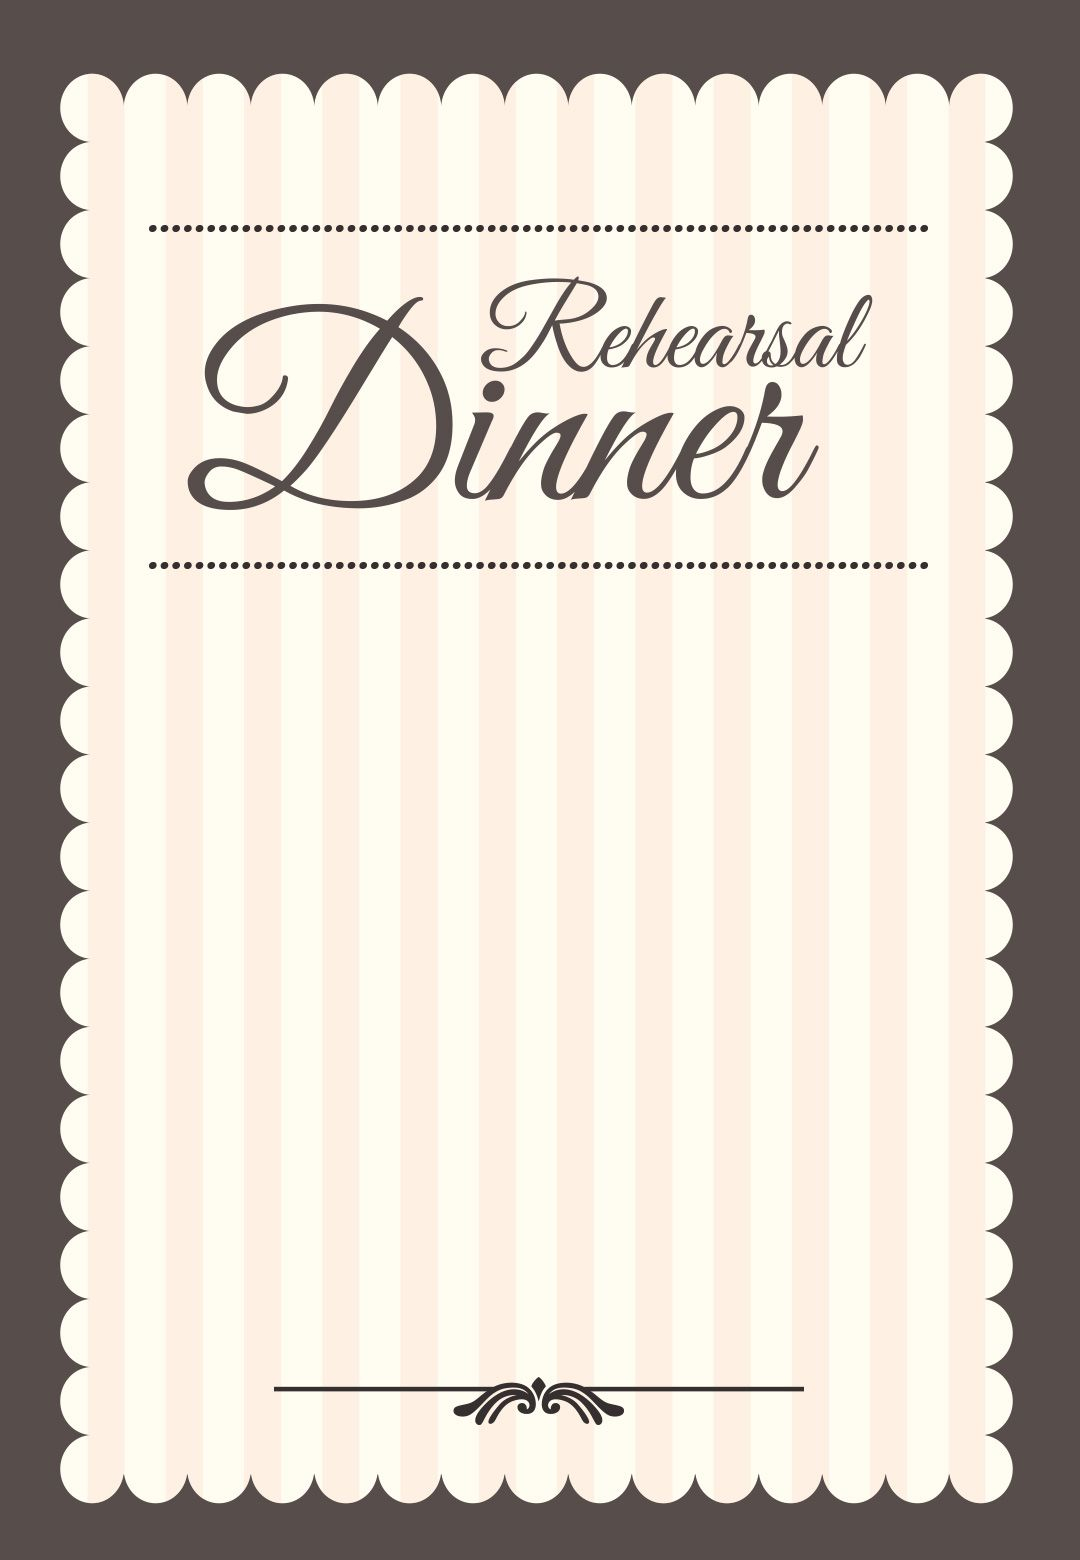 70 Special Dinner Invitation Template Free Examples Dinner with regard to dimensions 1080 X 1560